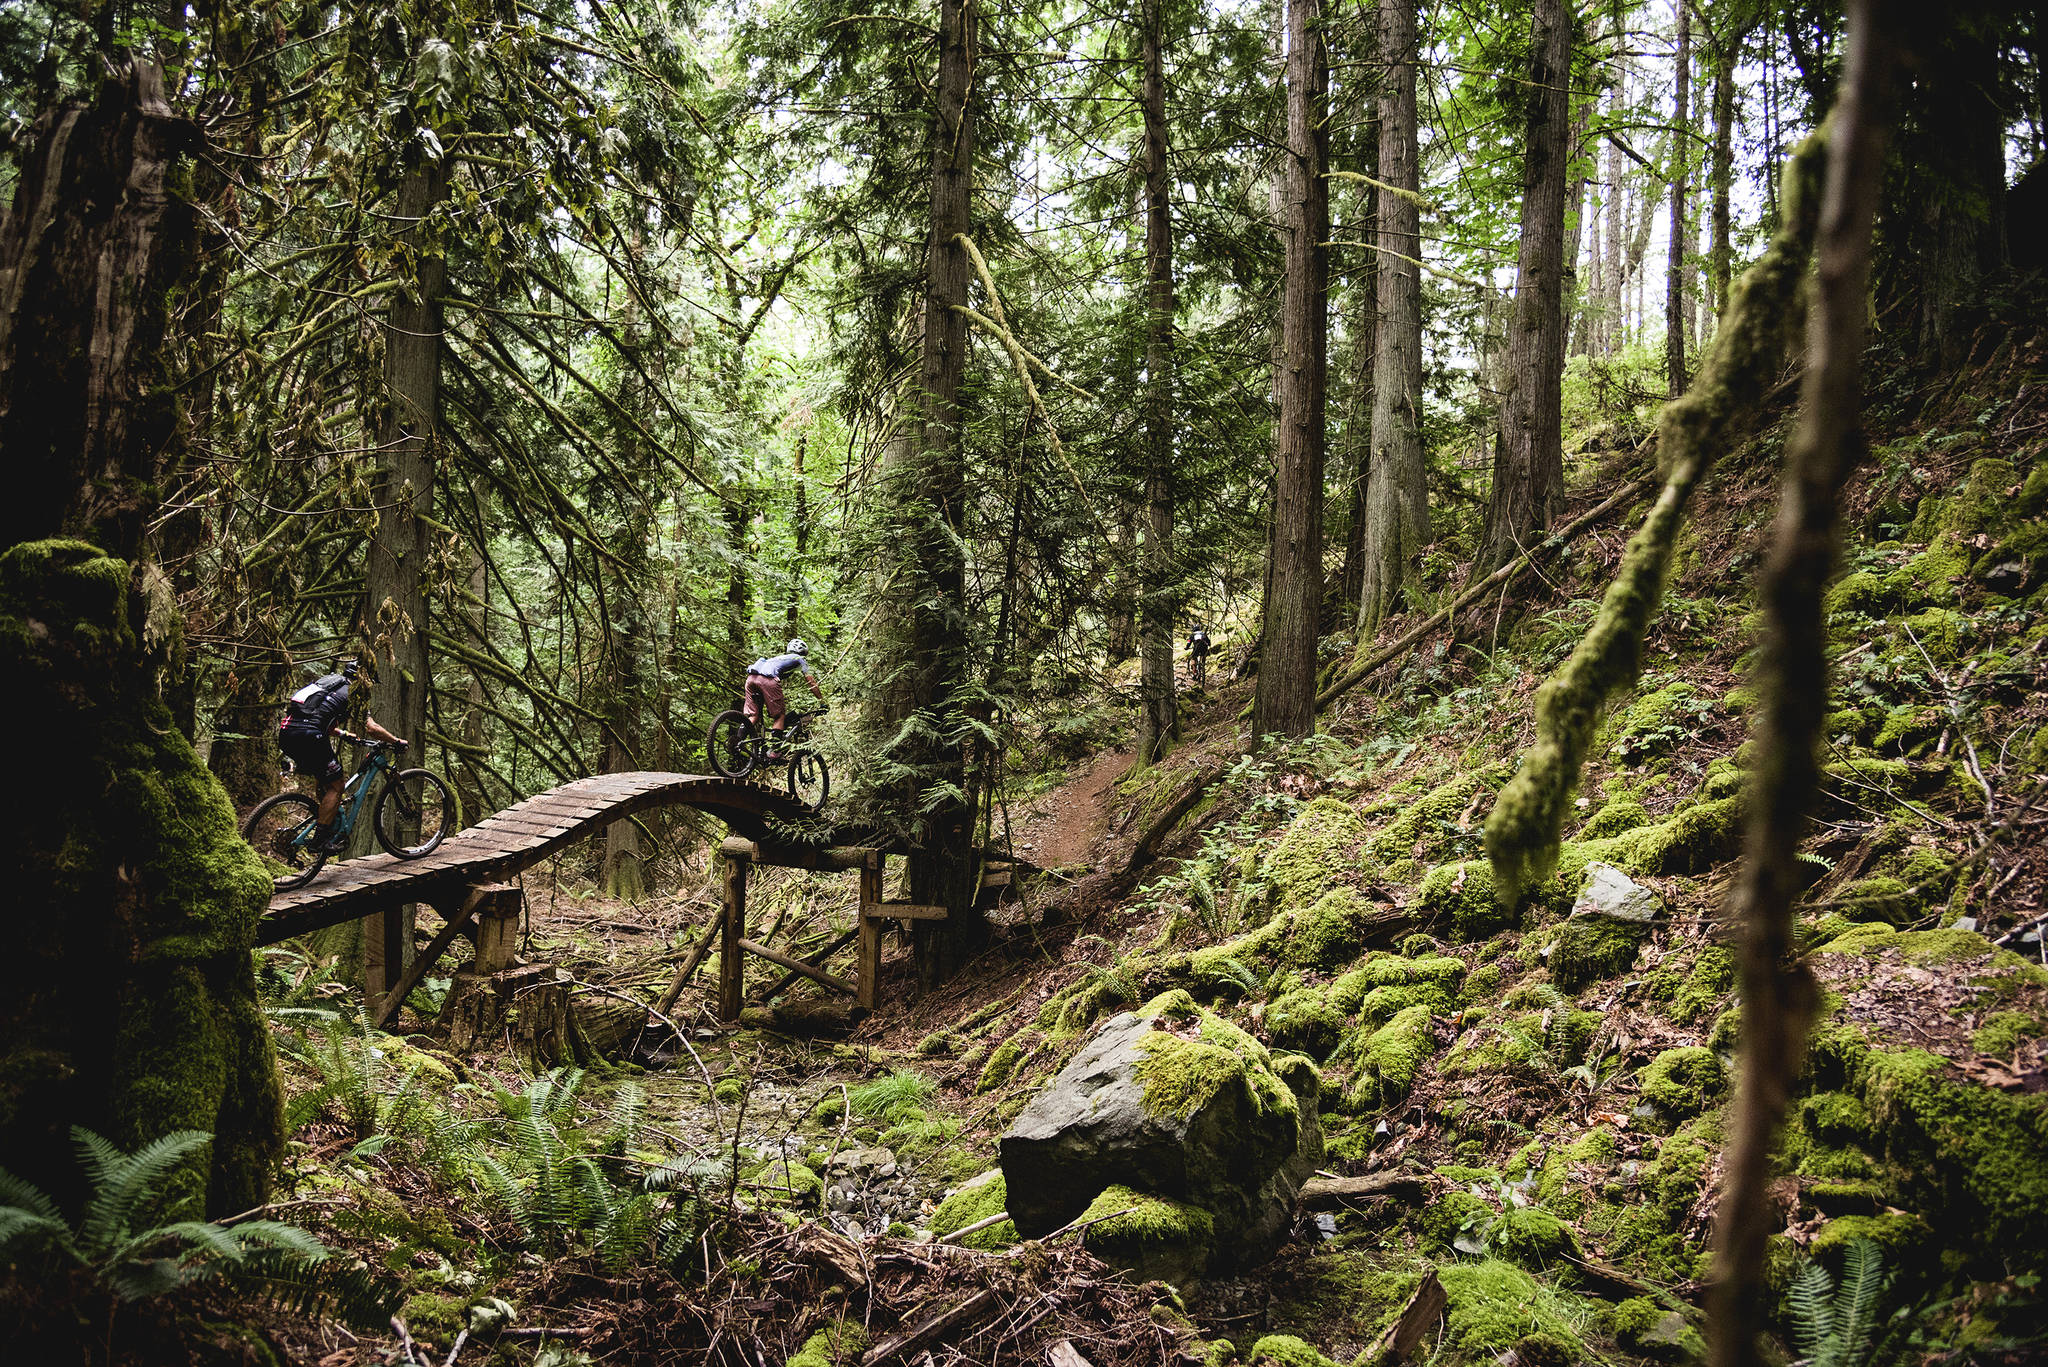 British Columbia trails are a measuring stick for trails around the Northwest, the creativity and uniqueness of the trails are one of the main reasons Powell Jones decided to do the BC Bike Race. Photo courtesy of Powell Jones